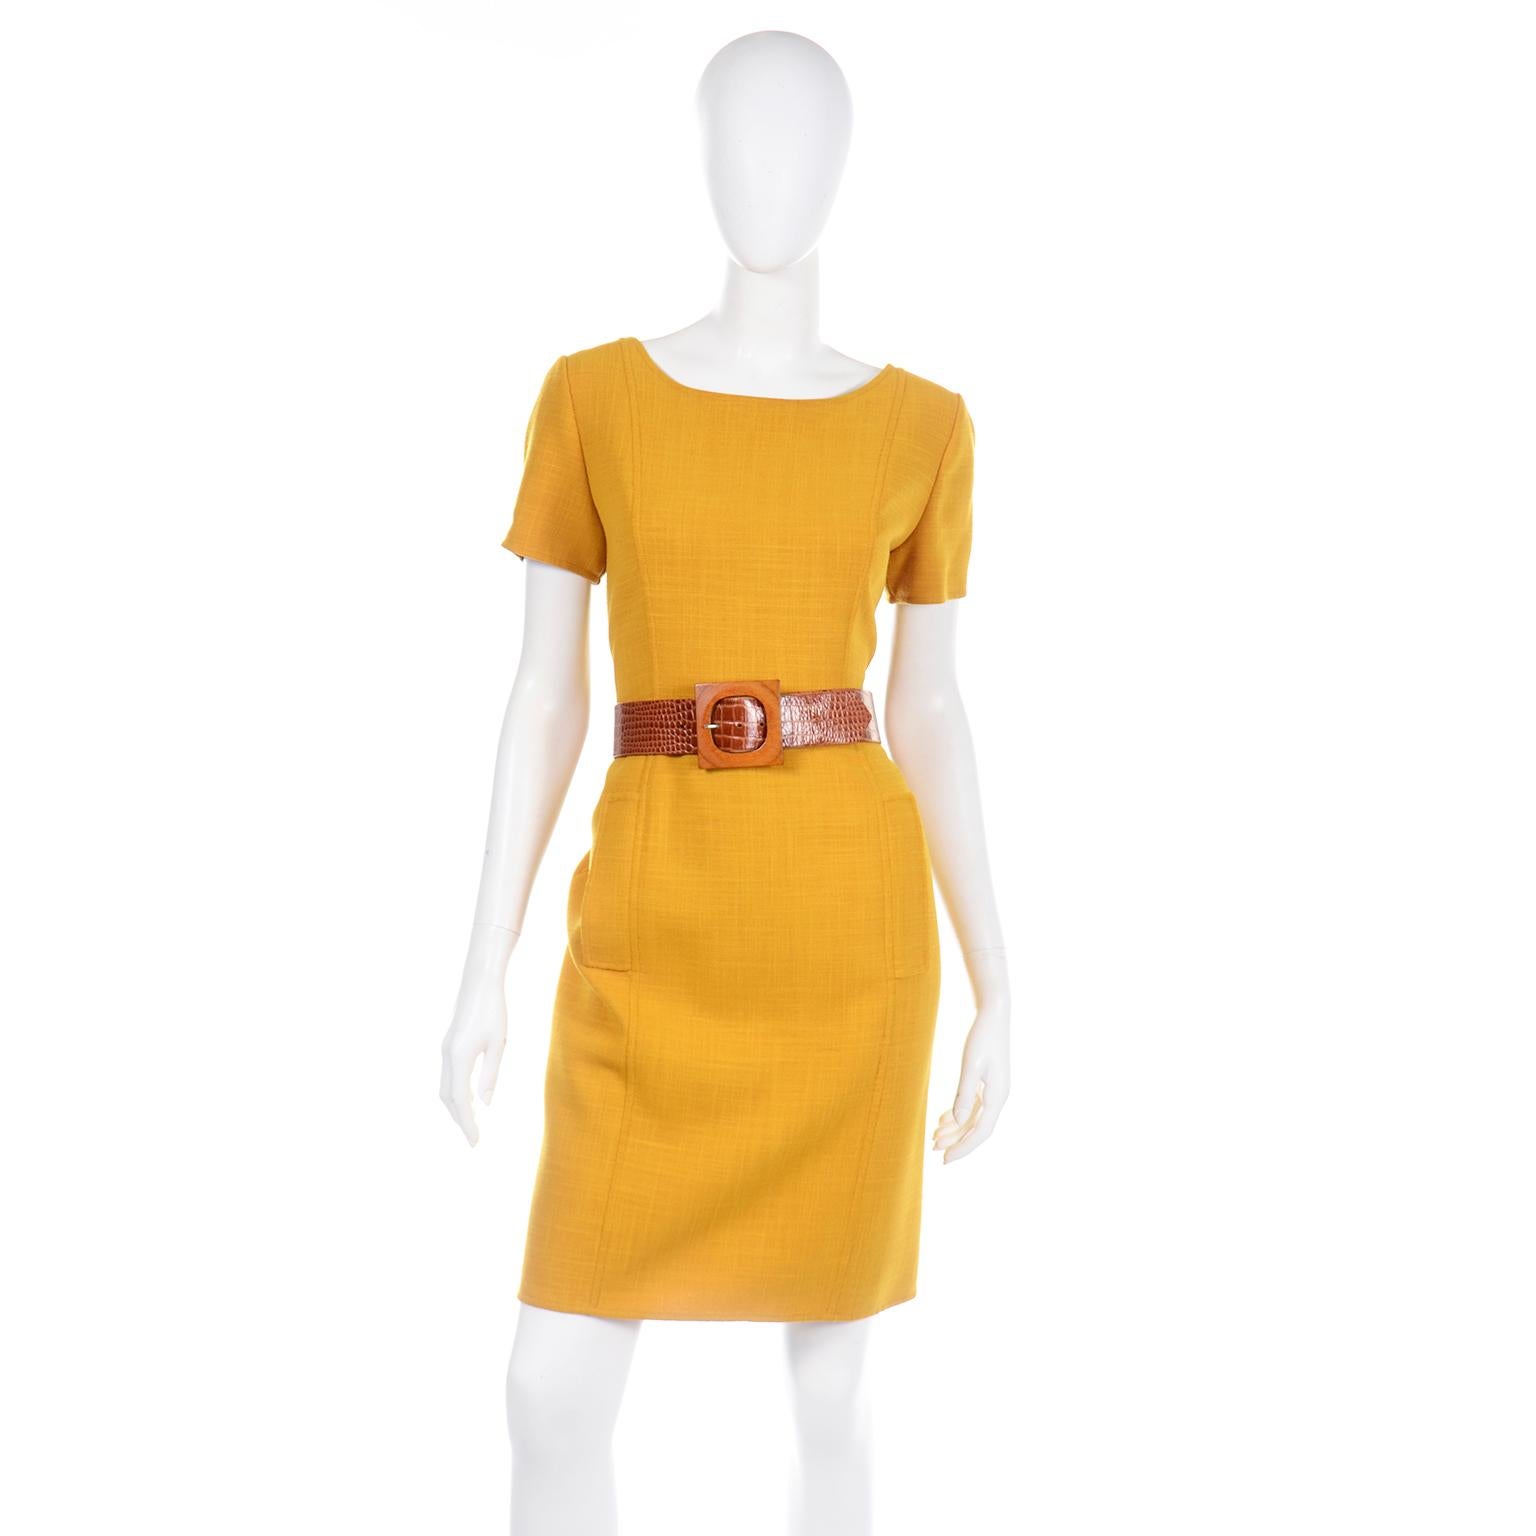 This is a beautiful ensemble from Oscar de la Renta that includes a 100% wool short sleeve dress with a belt and a button front jacket. The fabric is a rich shade of mustard yellow and it is a medium weight, perfect for Fall! The dress has front